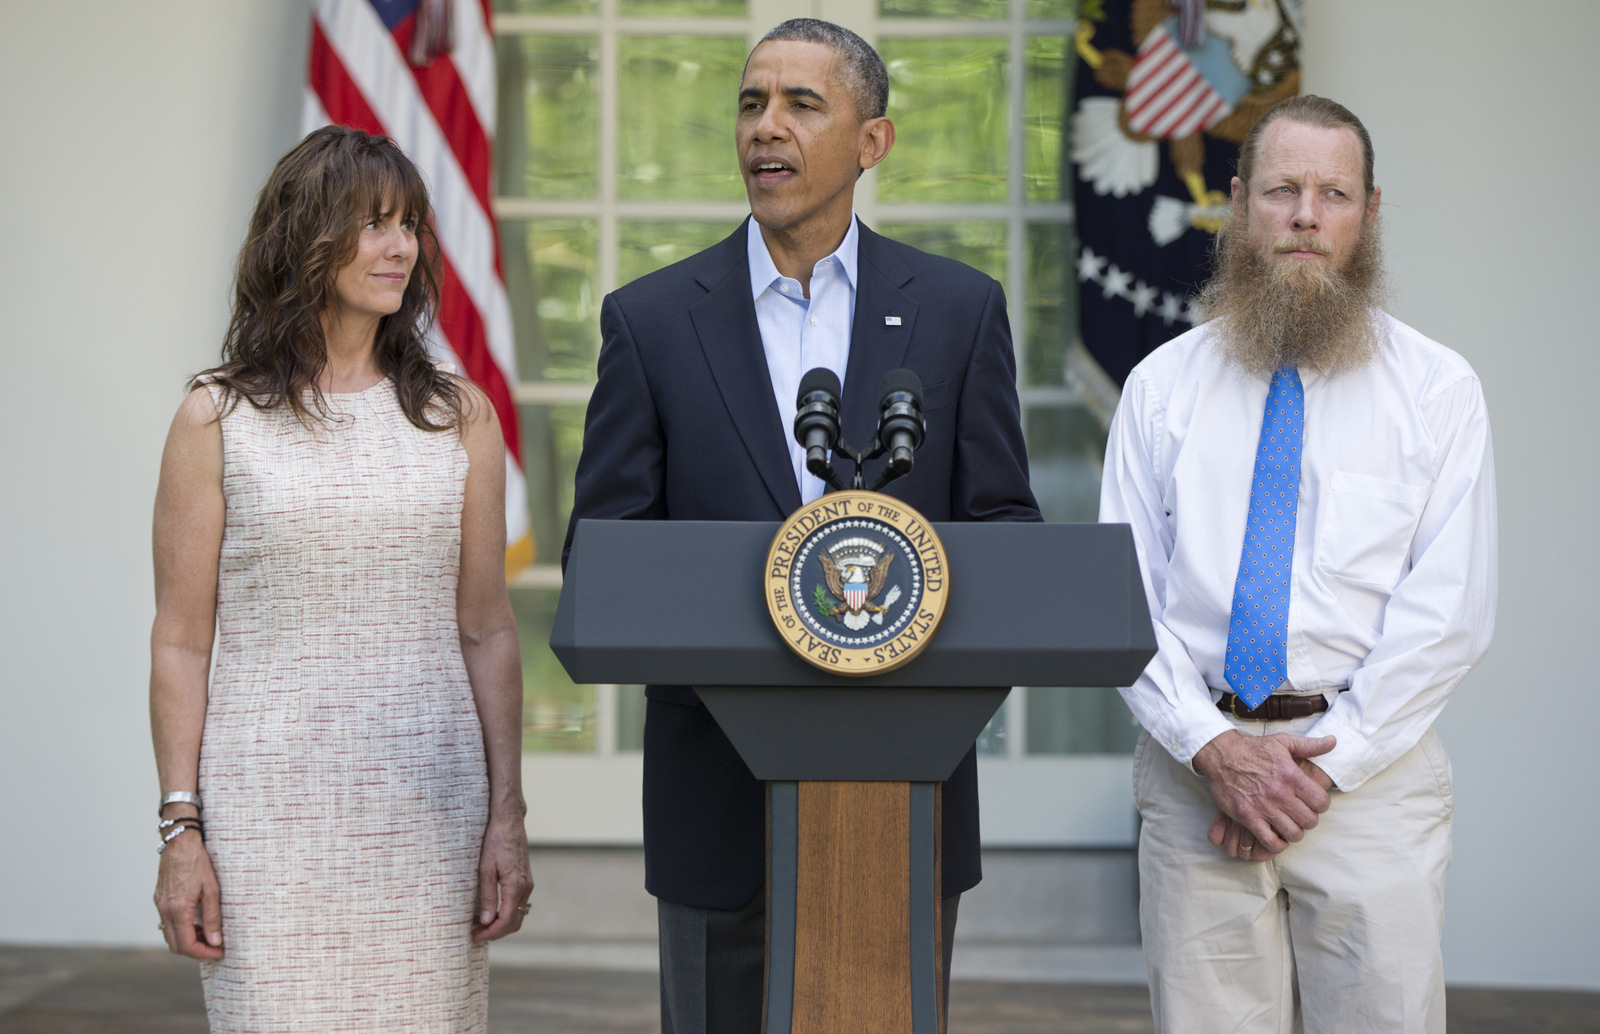 President Barack Obama, accompanied by Jani Bergdahl, left, and Bob Bergdahl, speaks during a news conference in the Rose Garden of the White House in Washington on Saturday, May 31, 2014 about the release of their son, U.S. Army Sgt. Bowe Bergdahl. (AP/Carolyn Kaster)